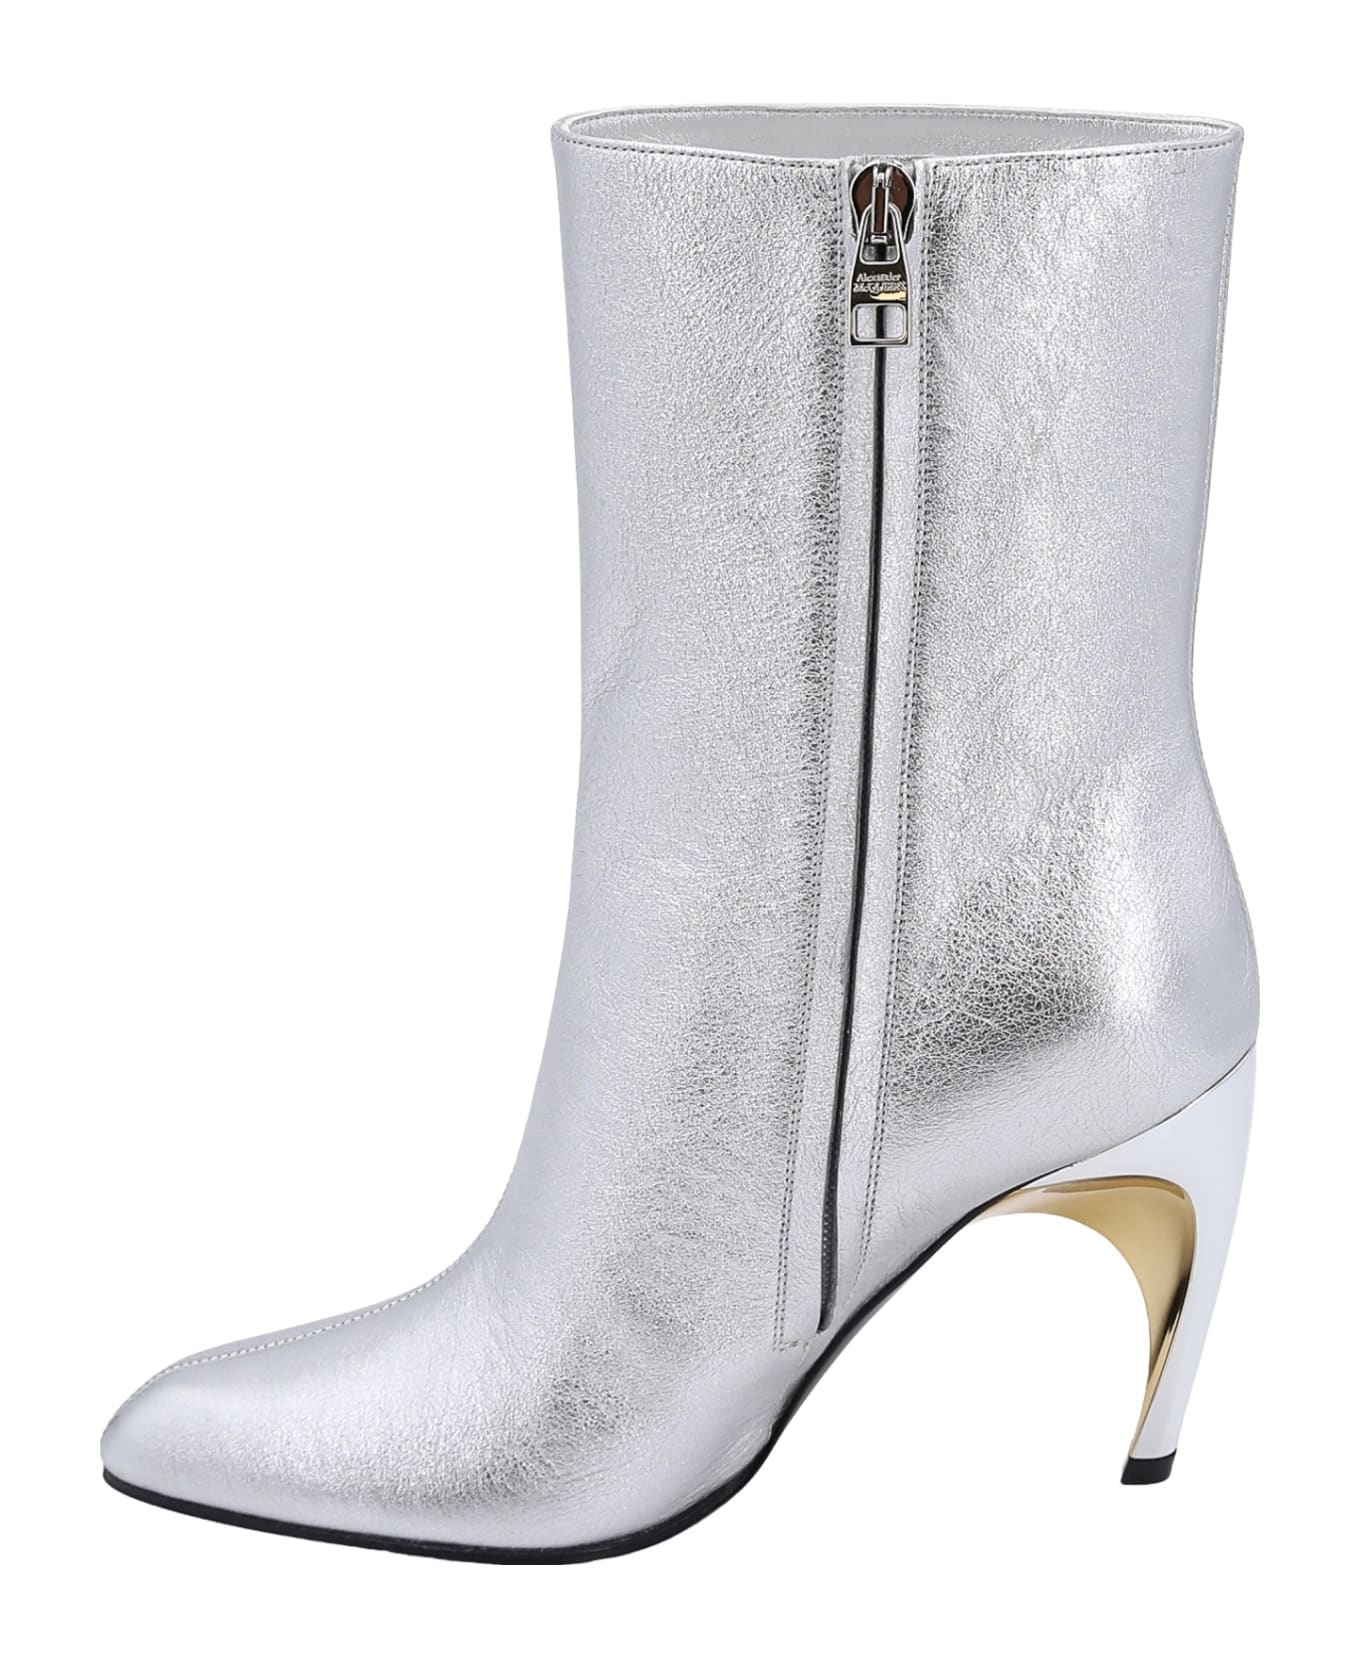 Alexander McQueen Armadillo Ankle Boots - Silver